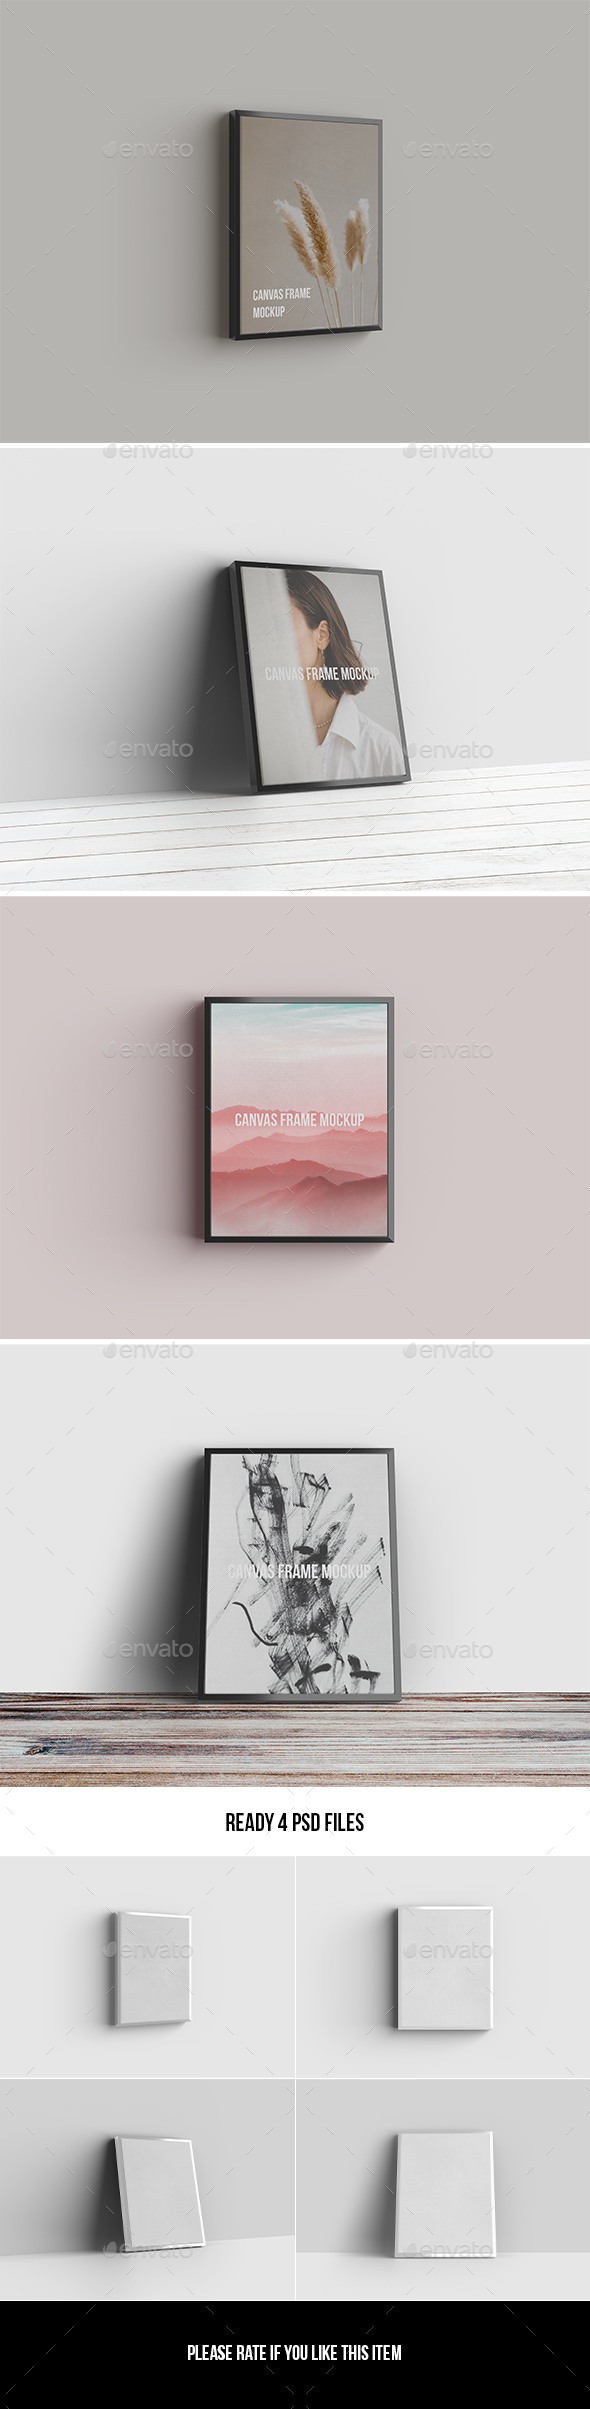 Download Frame Mockup Graphics Designs Templates From Graphicriver